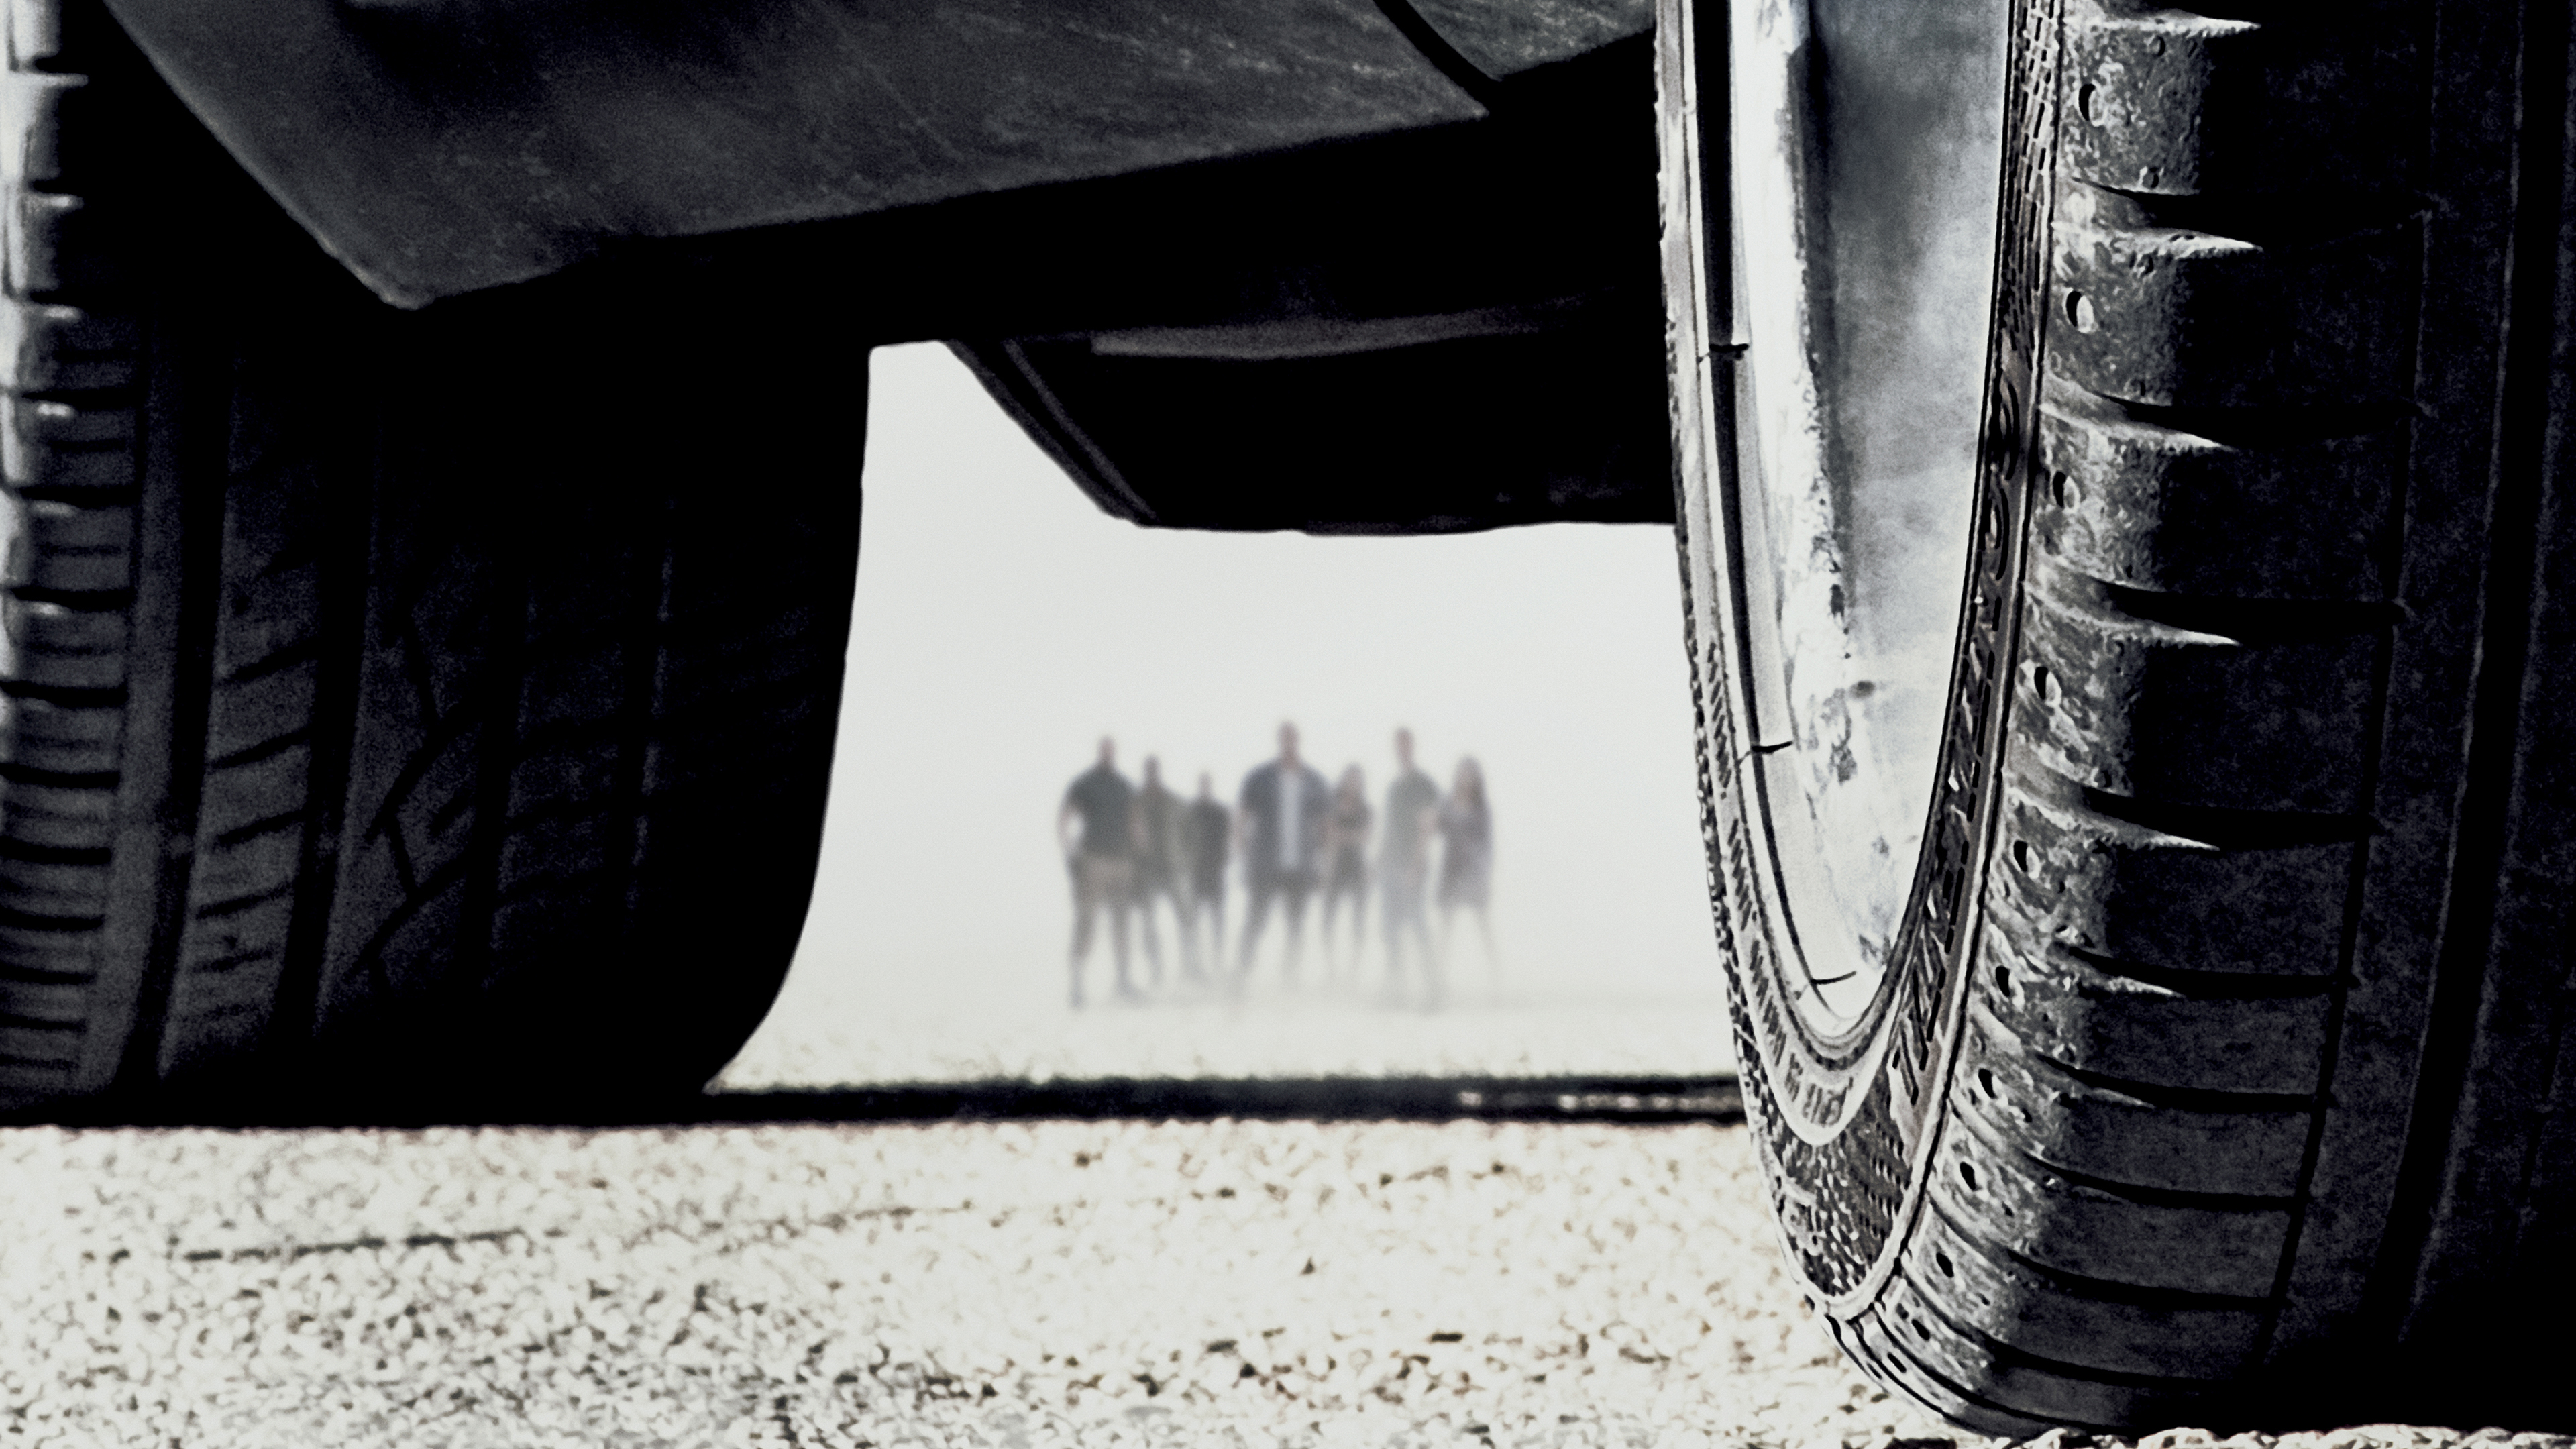 202 Fast & Furious HD Wallpapers | Background Images ...